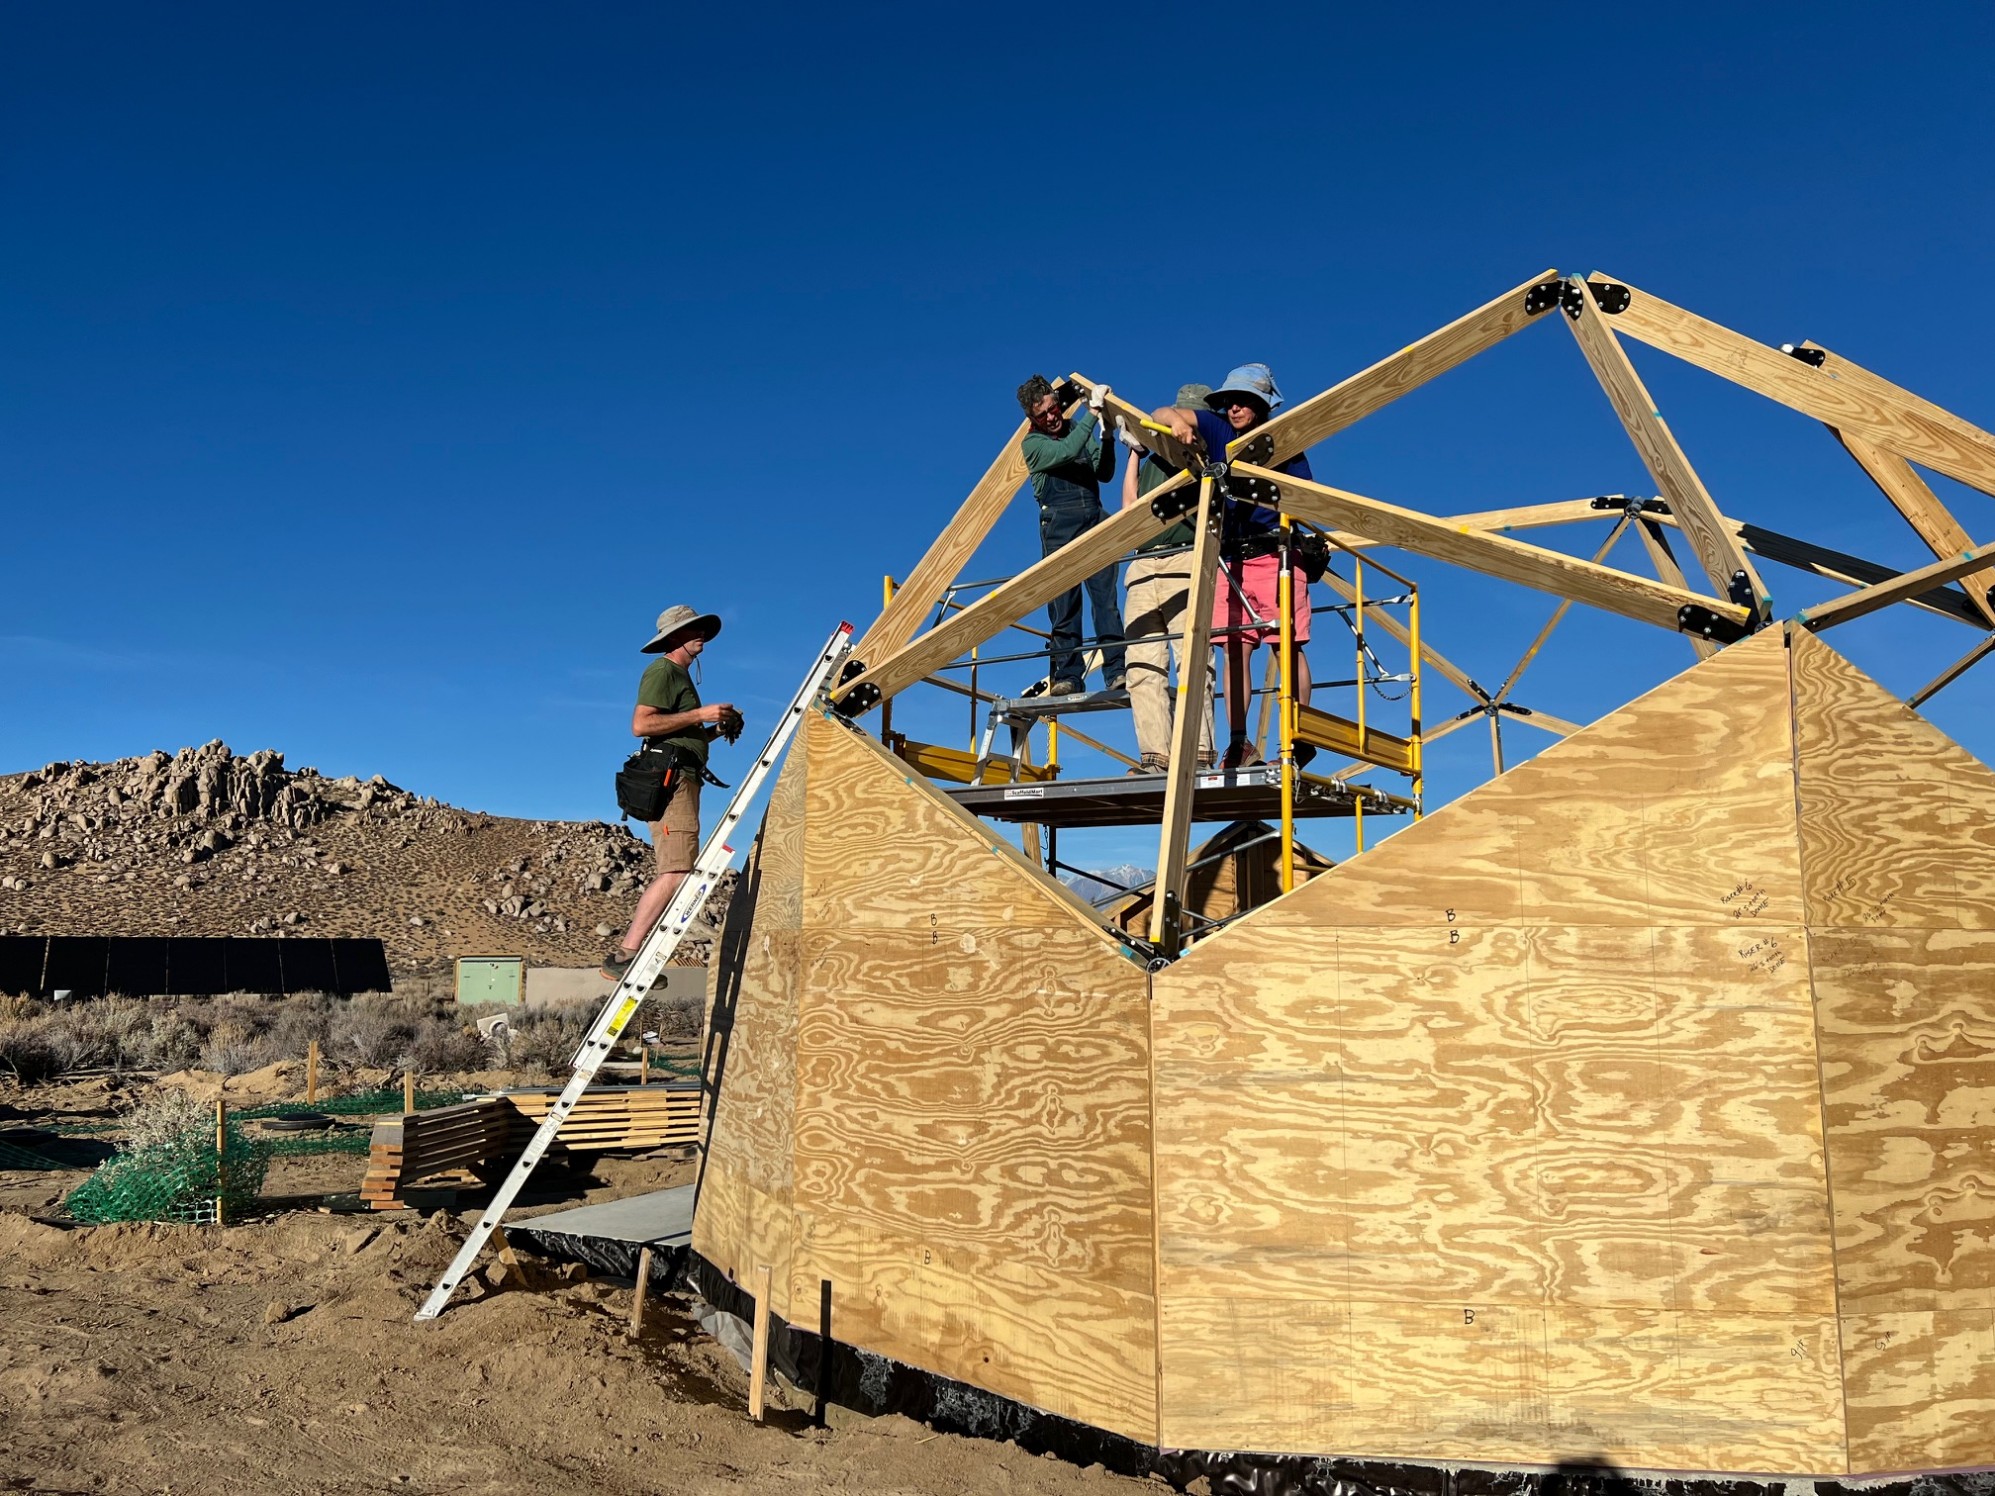 3 people crowd the scaffolding and 1 is on the extension ladder to fit and connect 2 stubborn struts on a geodesic dome